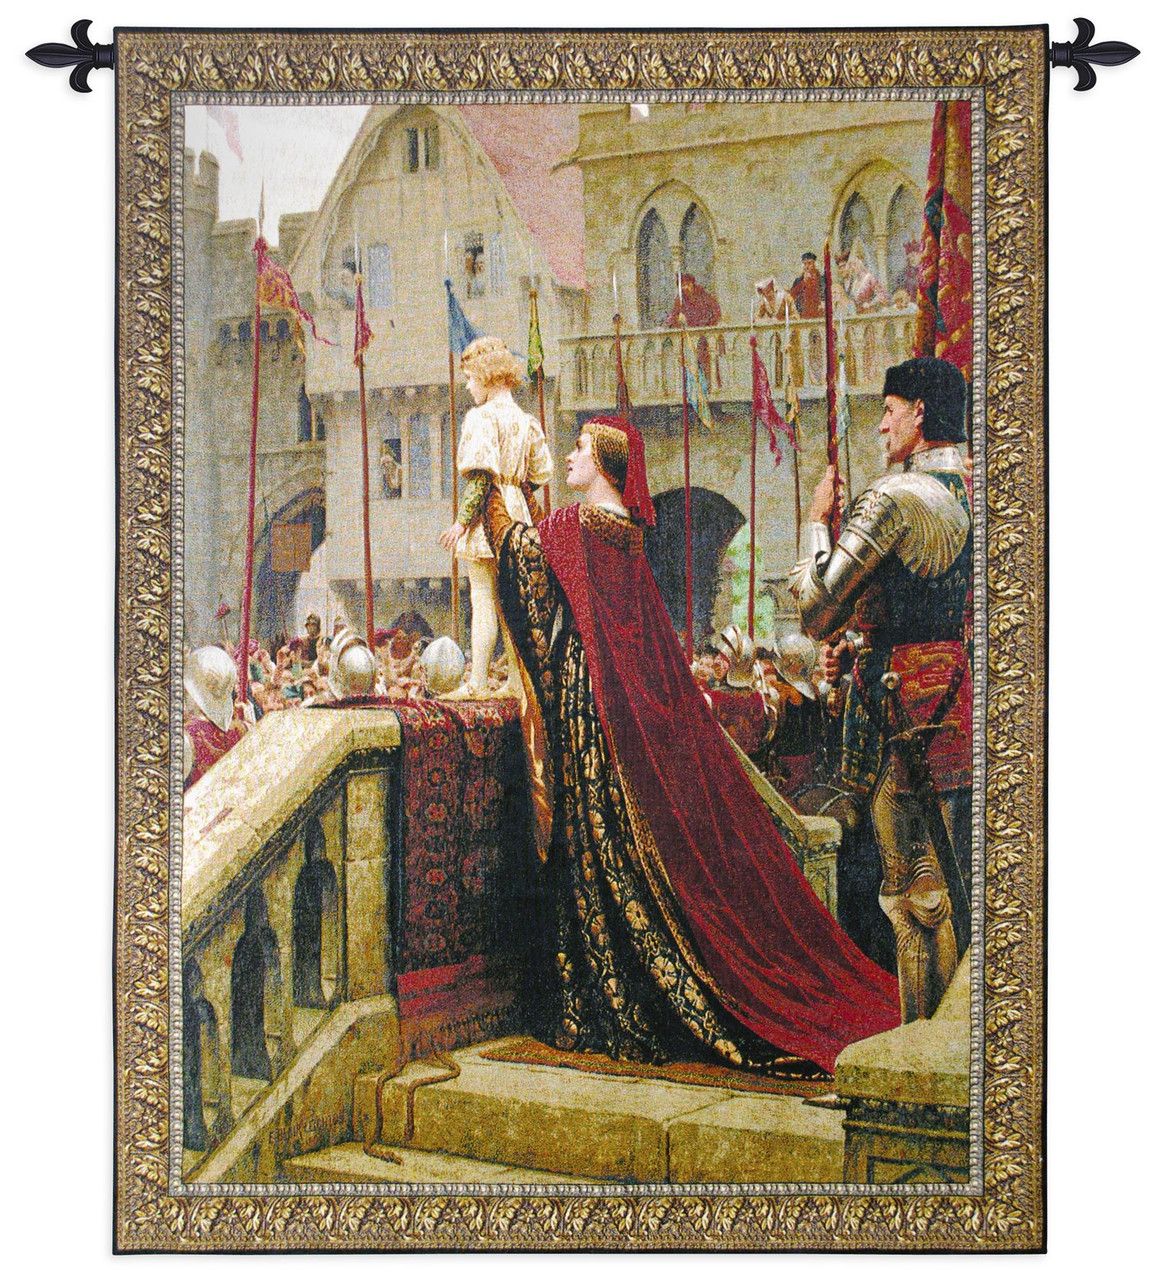 A Little Prince Likely in Time to Bless a Royal Throne by Edmund Blair  Leighton Woven Tapestry Wall Art Hanging Romantic Medieval Royal Theme  100% Cotton USA Size Size 65x52